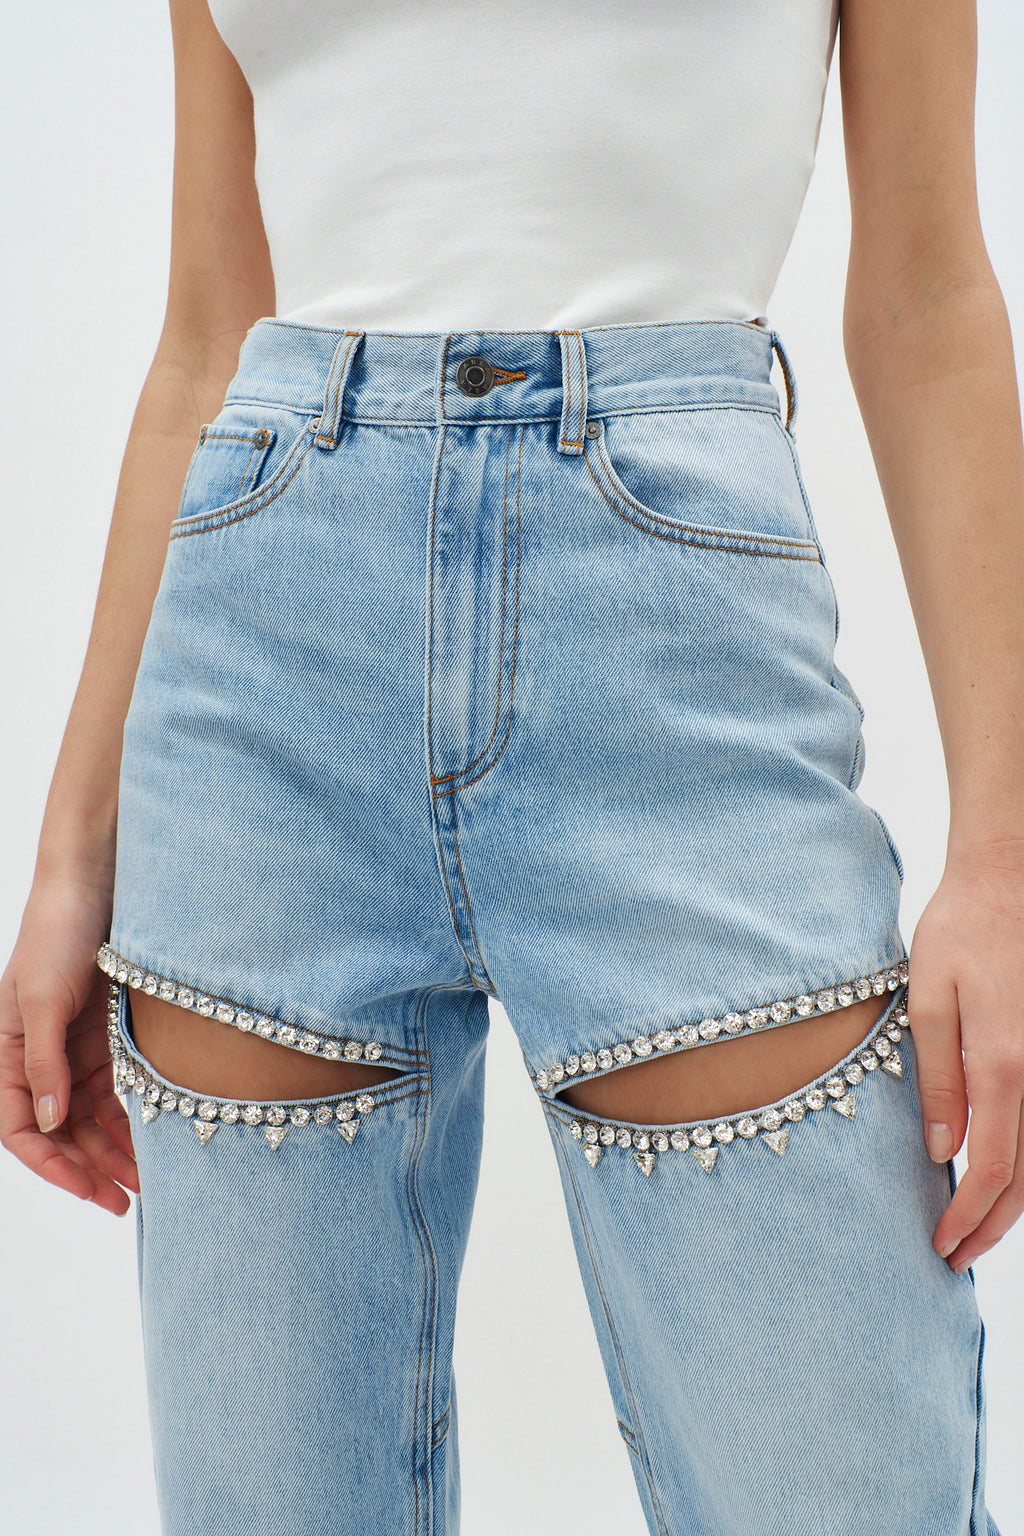 Denim Jeans with Diamante Embellished Cut-Outs Area NYC